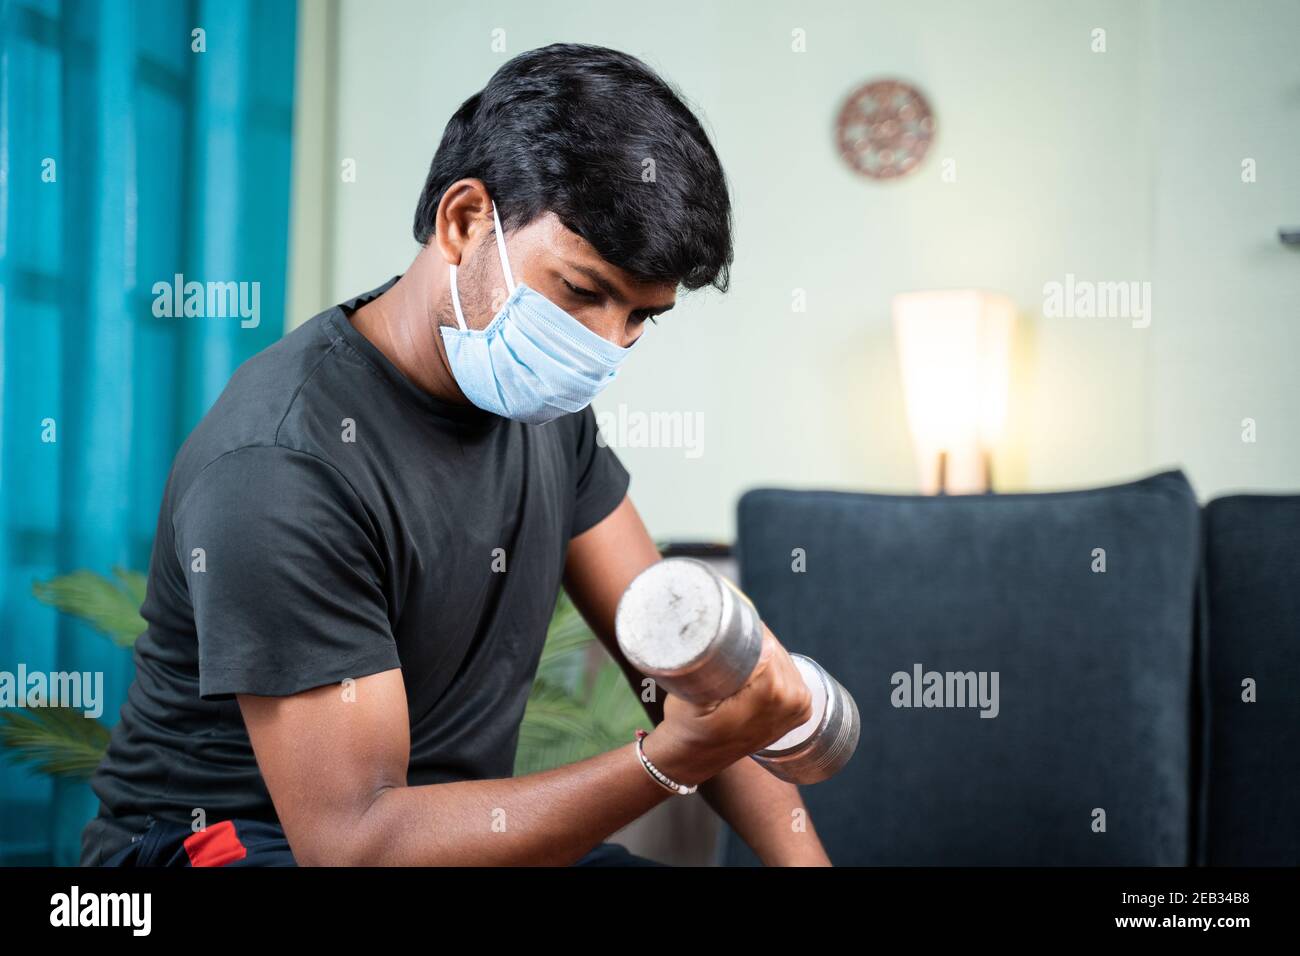 Young man with face mask busy in work out or doing exercise using dumbbell at home - concept of home gym due to coronavirus covid-19 pandemic Stock Photo